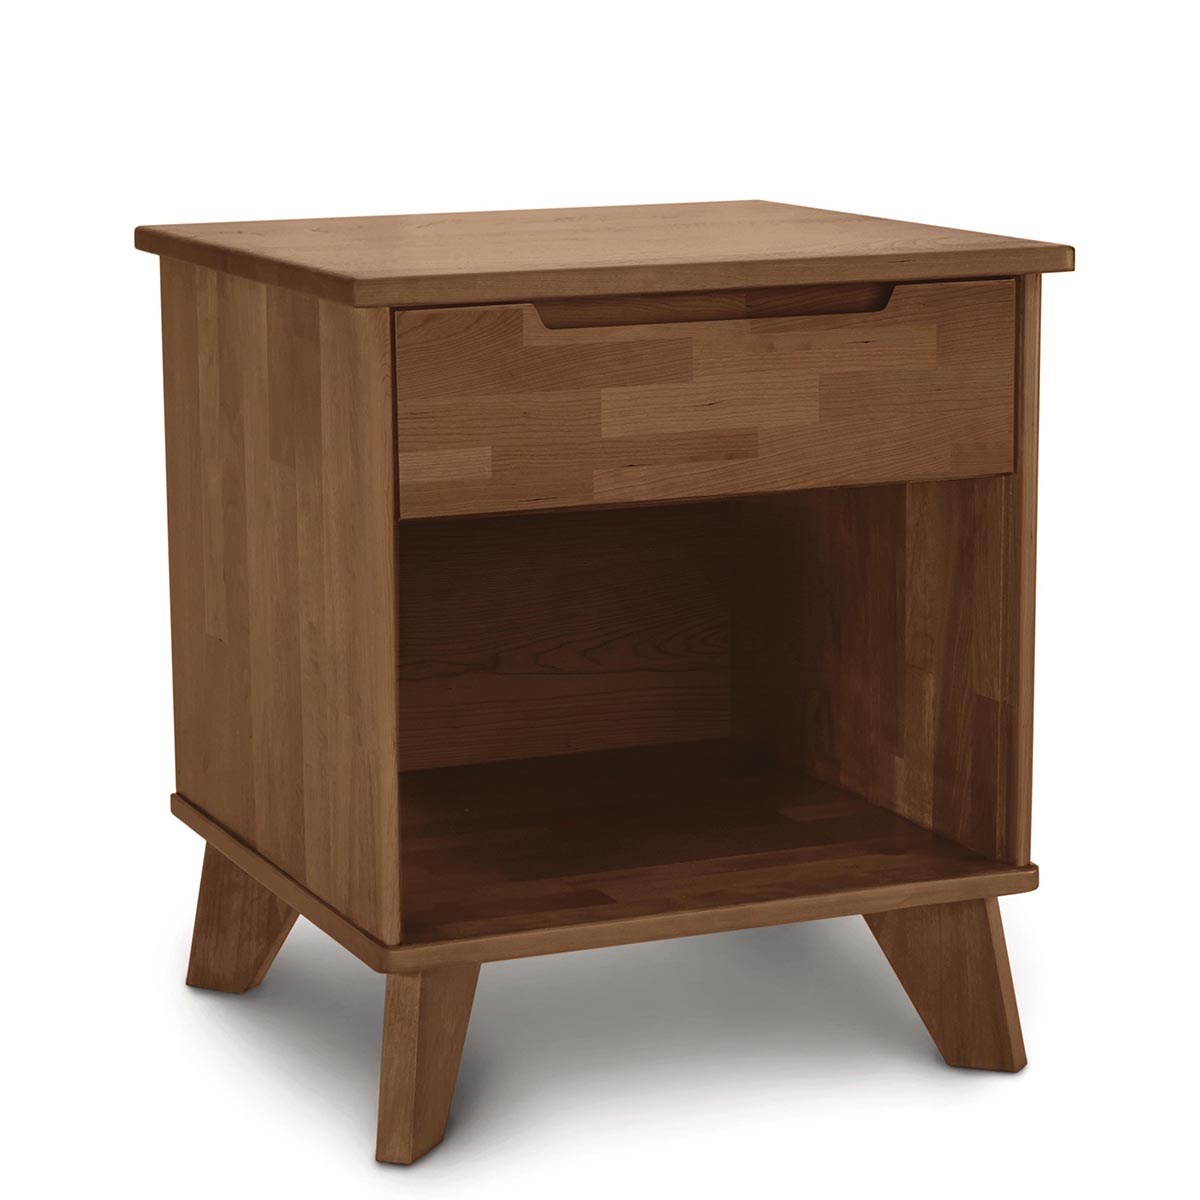 Linn One Drawer Nightstand in Saddle Cherry